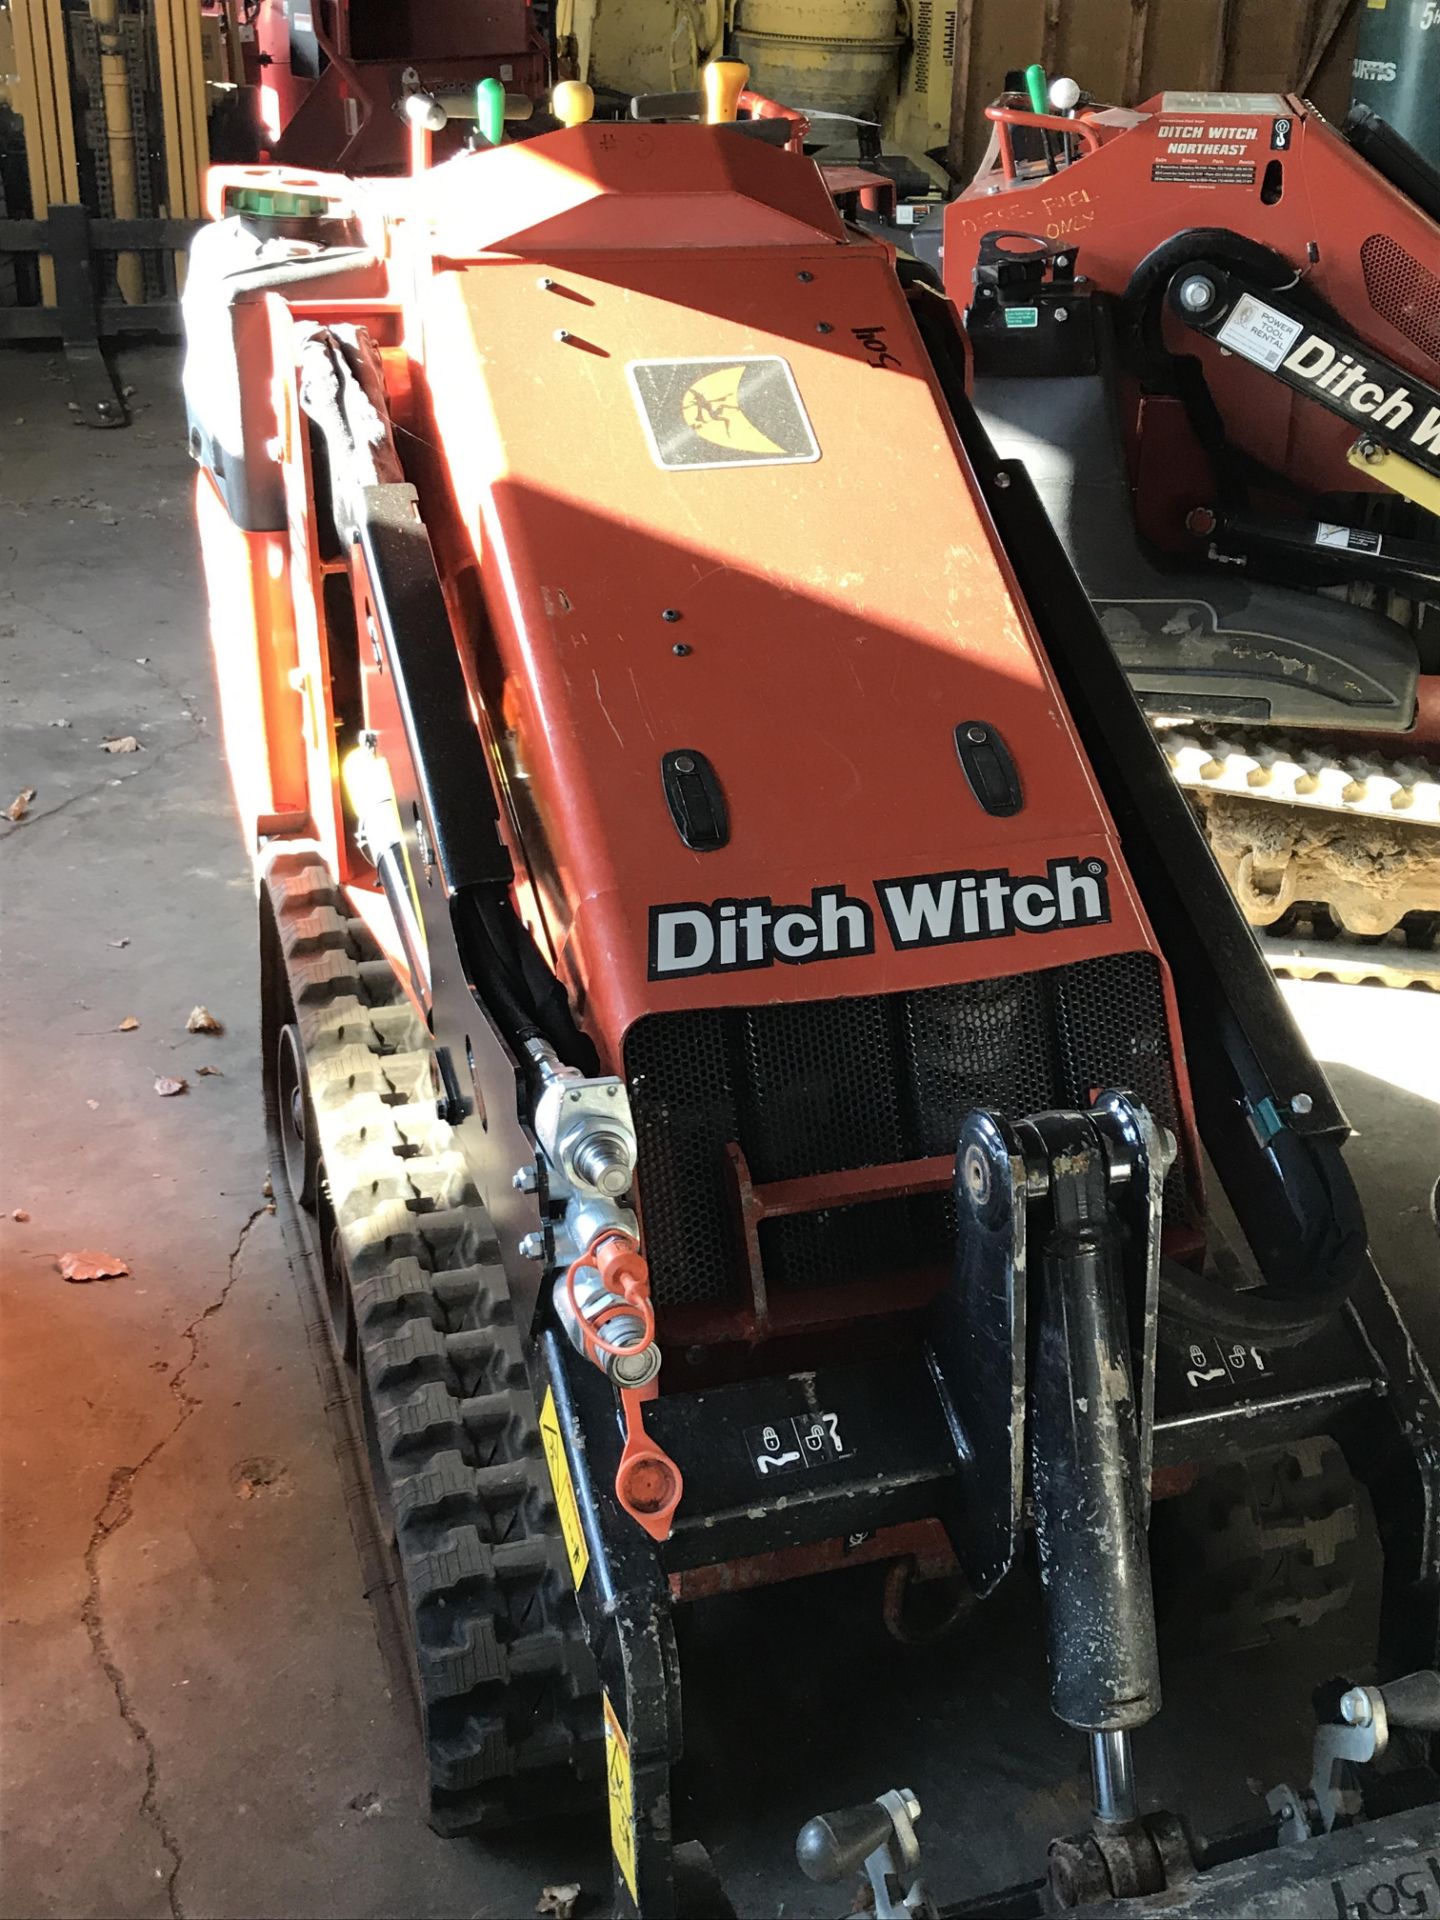 2017 Ditch Witch #SK600 Diesel powered Rubber Tracks, 278 HRS, 34" Bucket